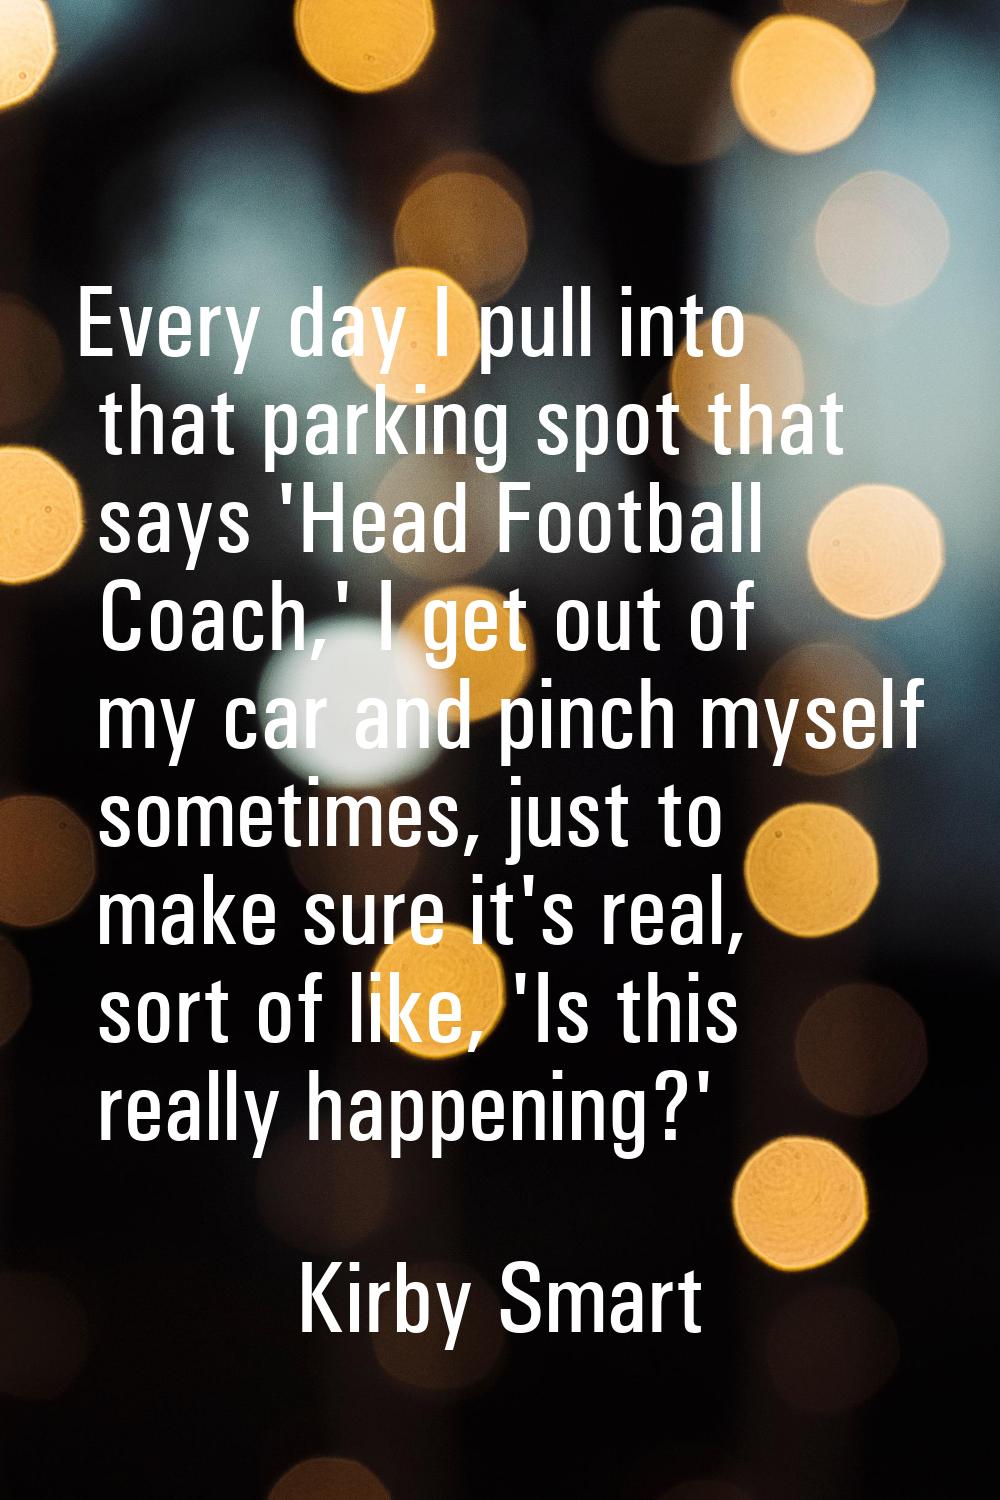 Every day I pull into that parking spot that says 'Head Football Coach,' I get out of my car and pi